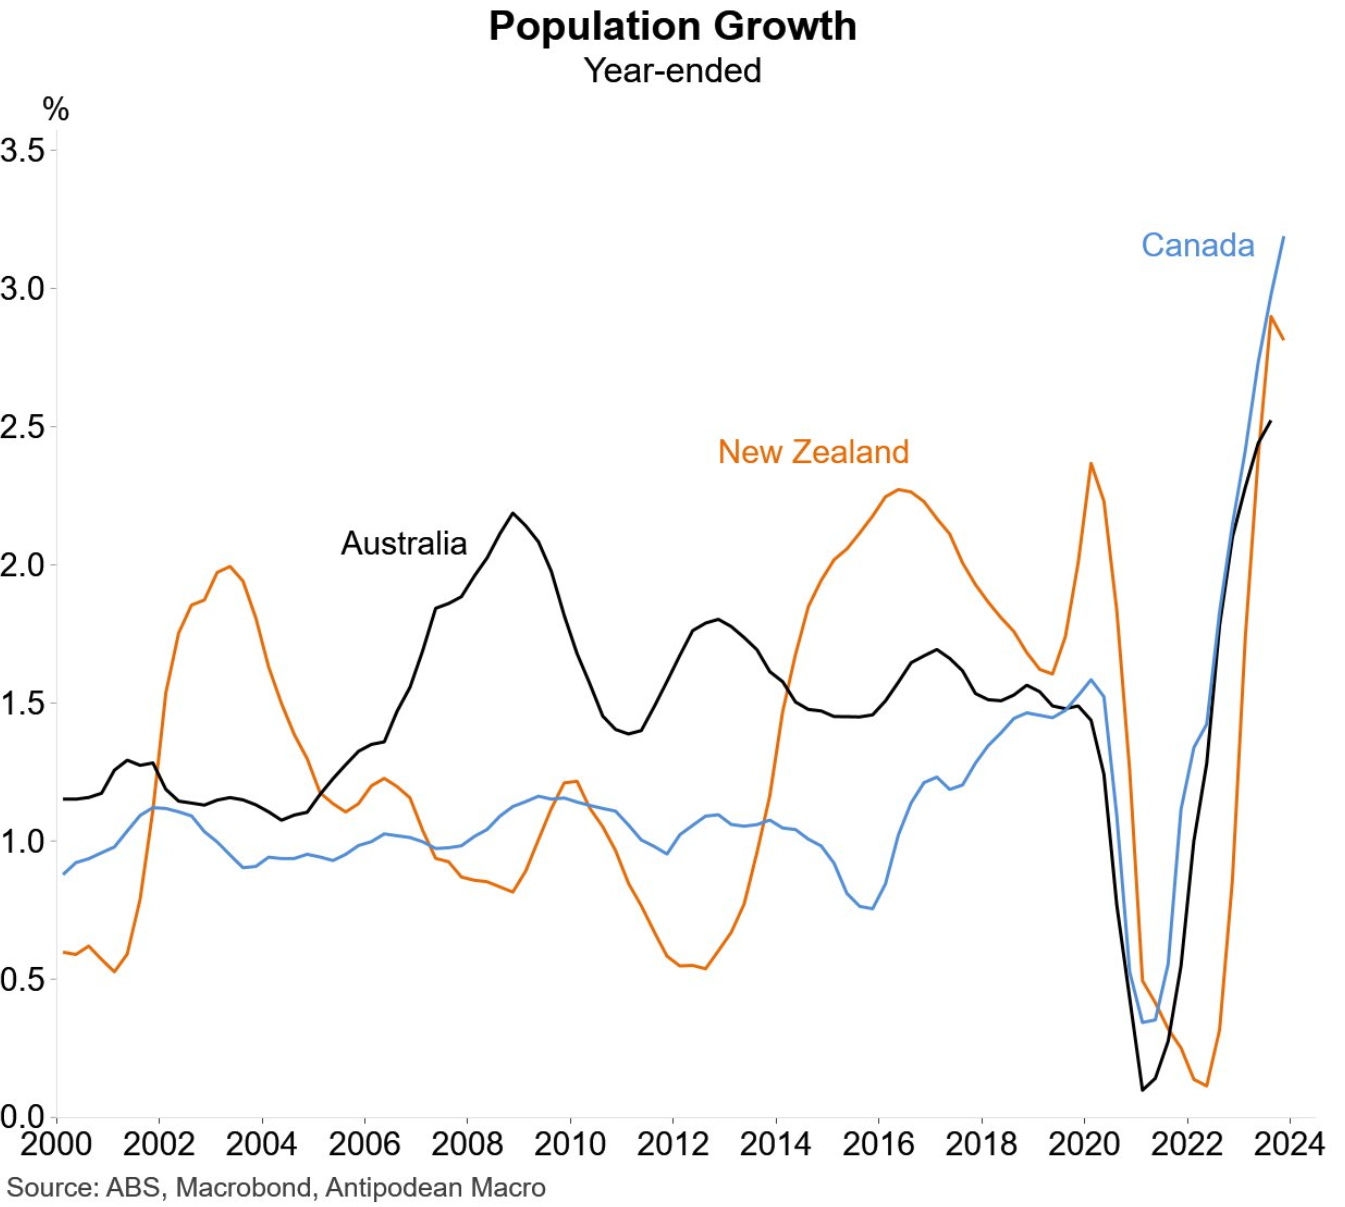 Anglo population growth